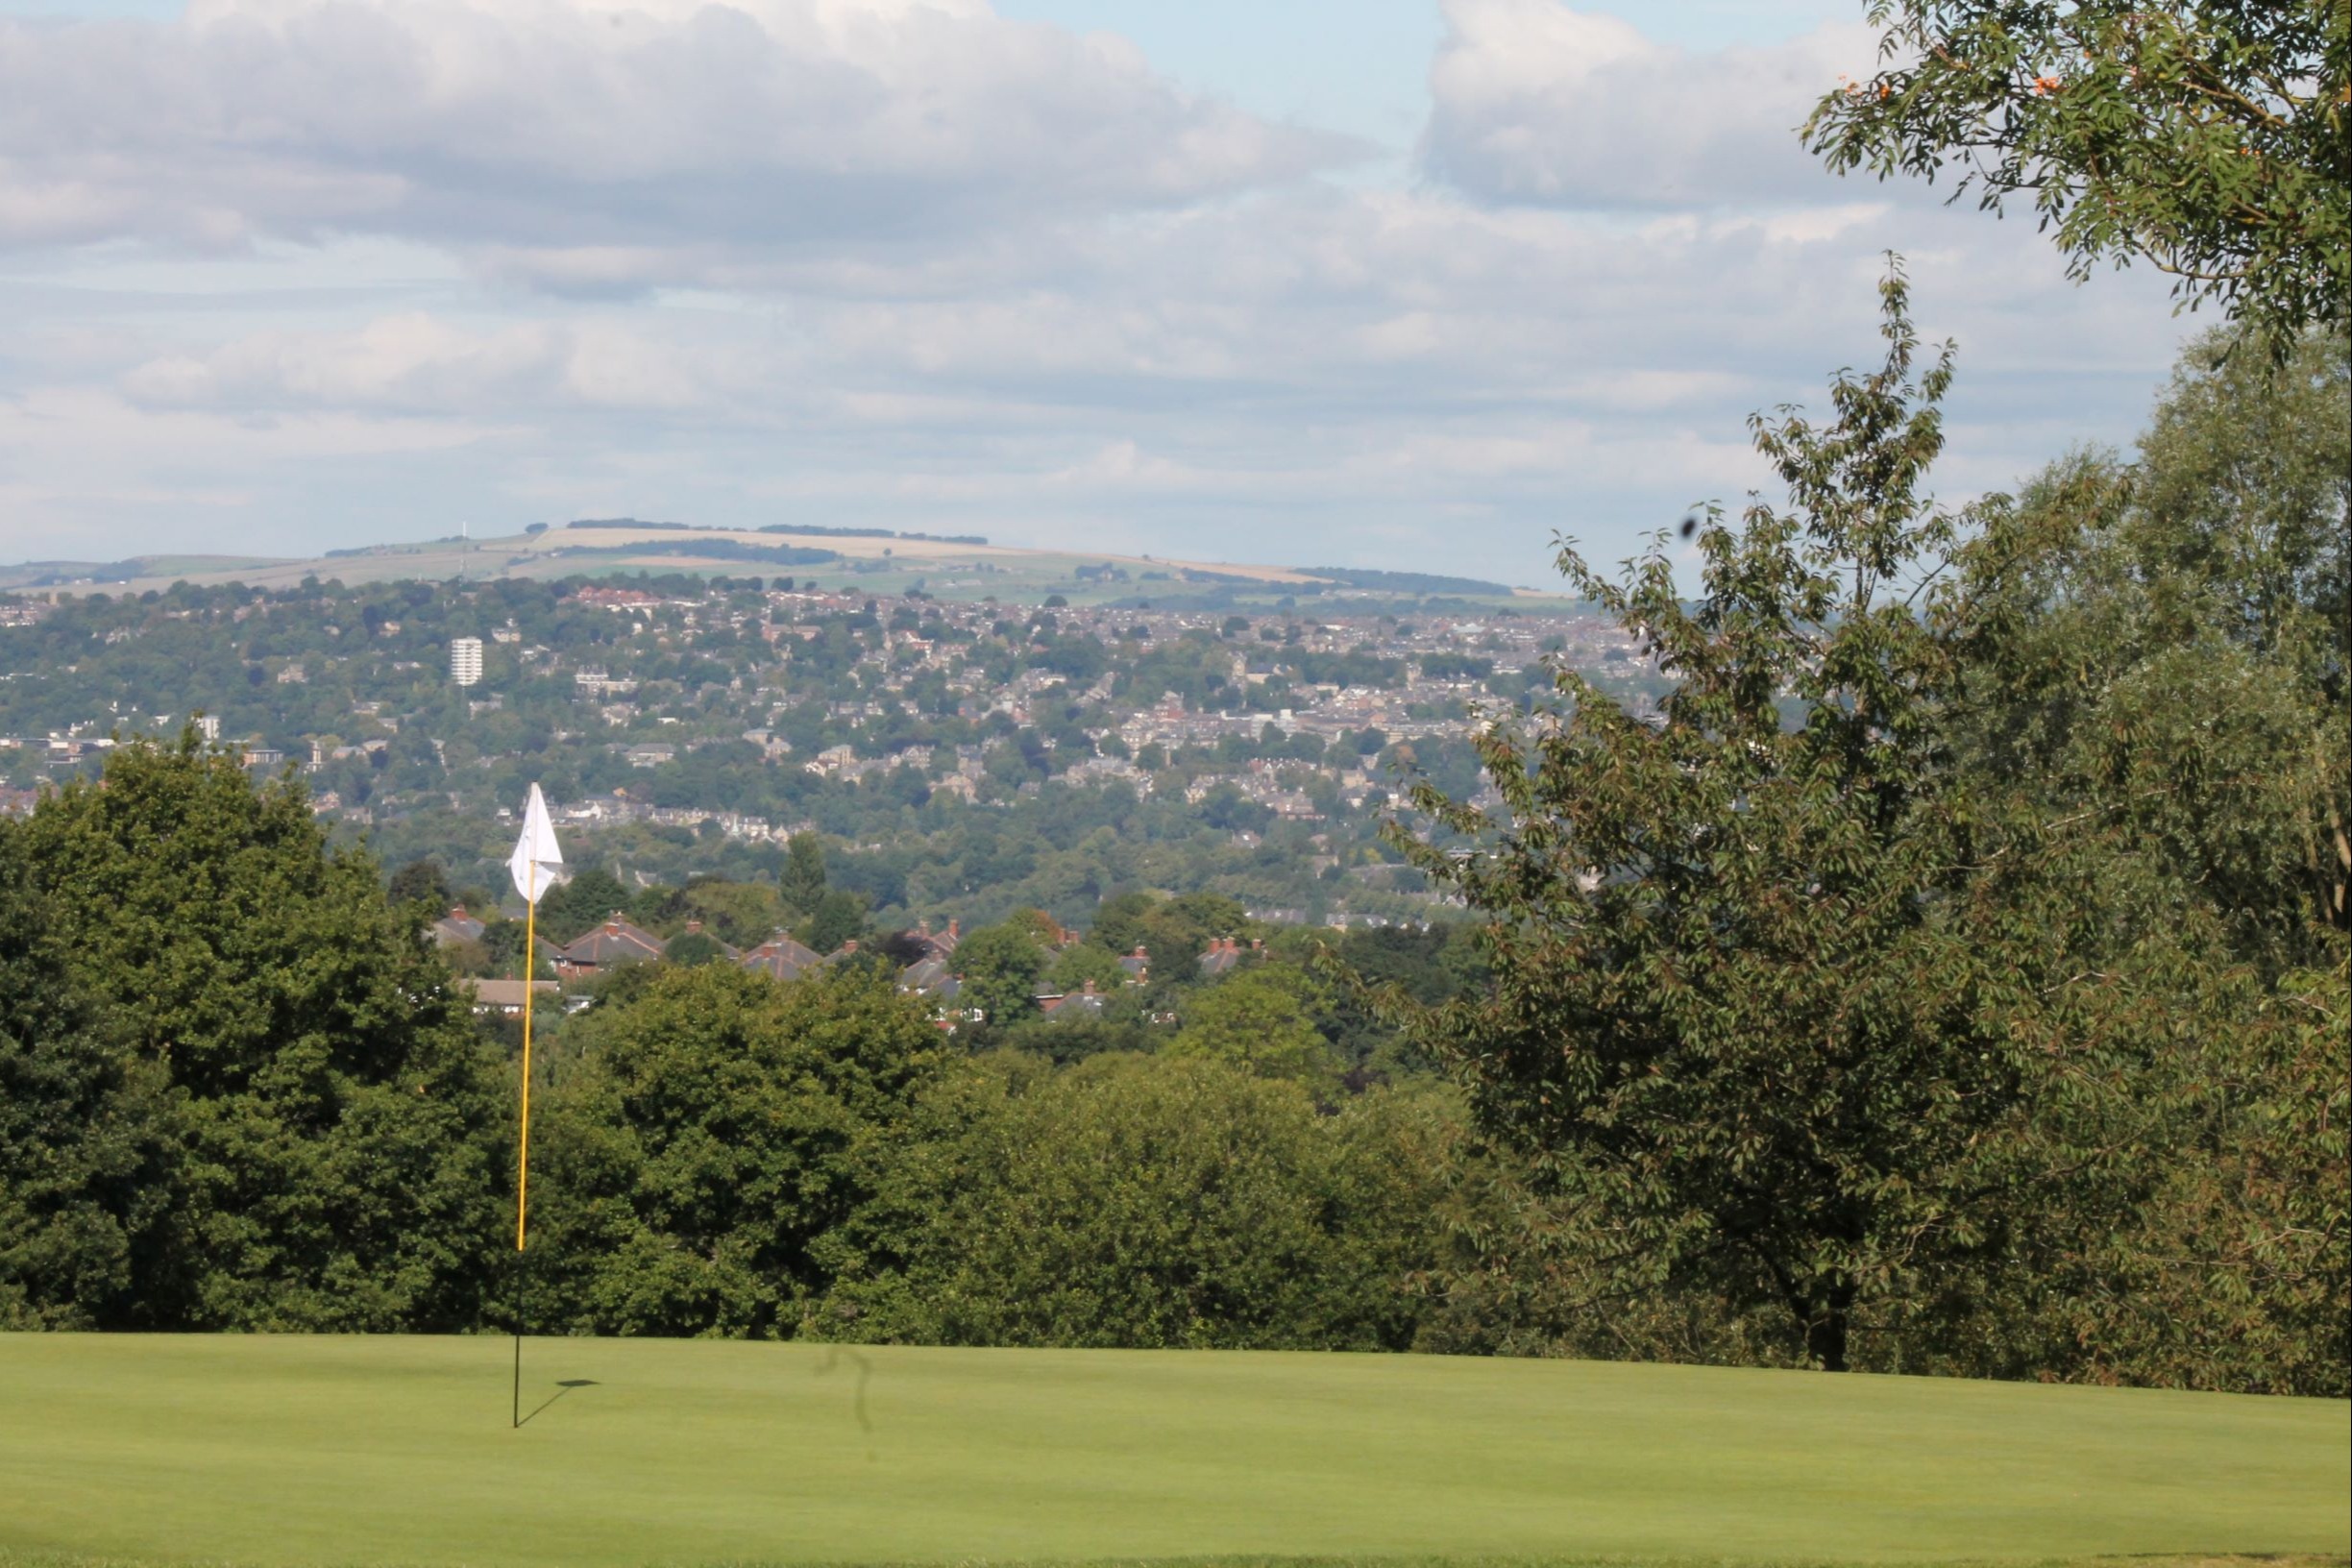 16th Green looking over the city